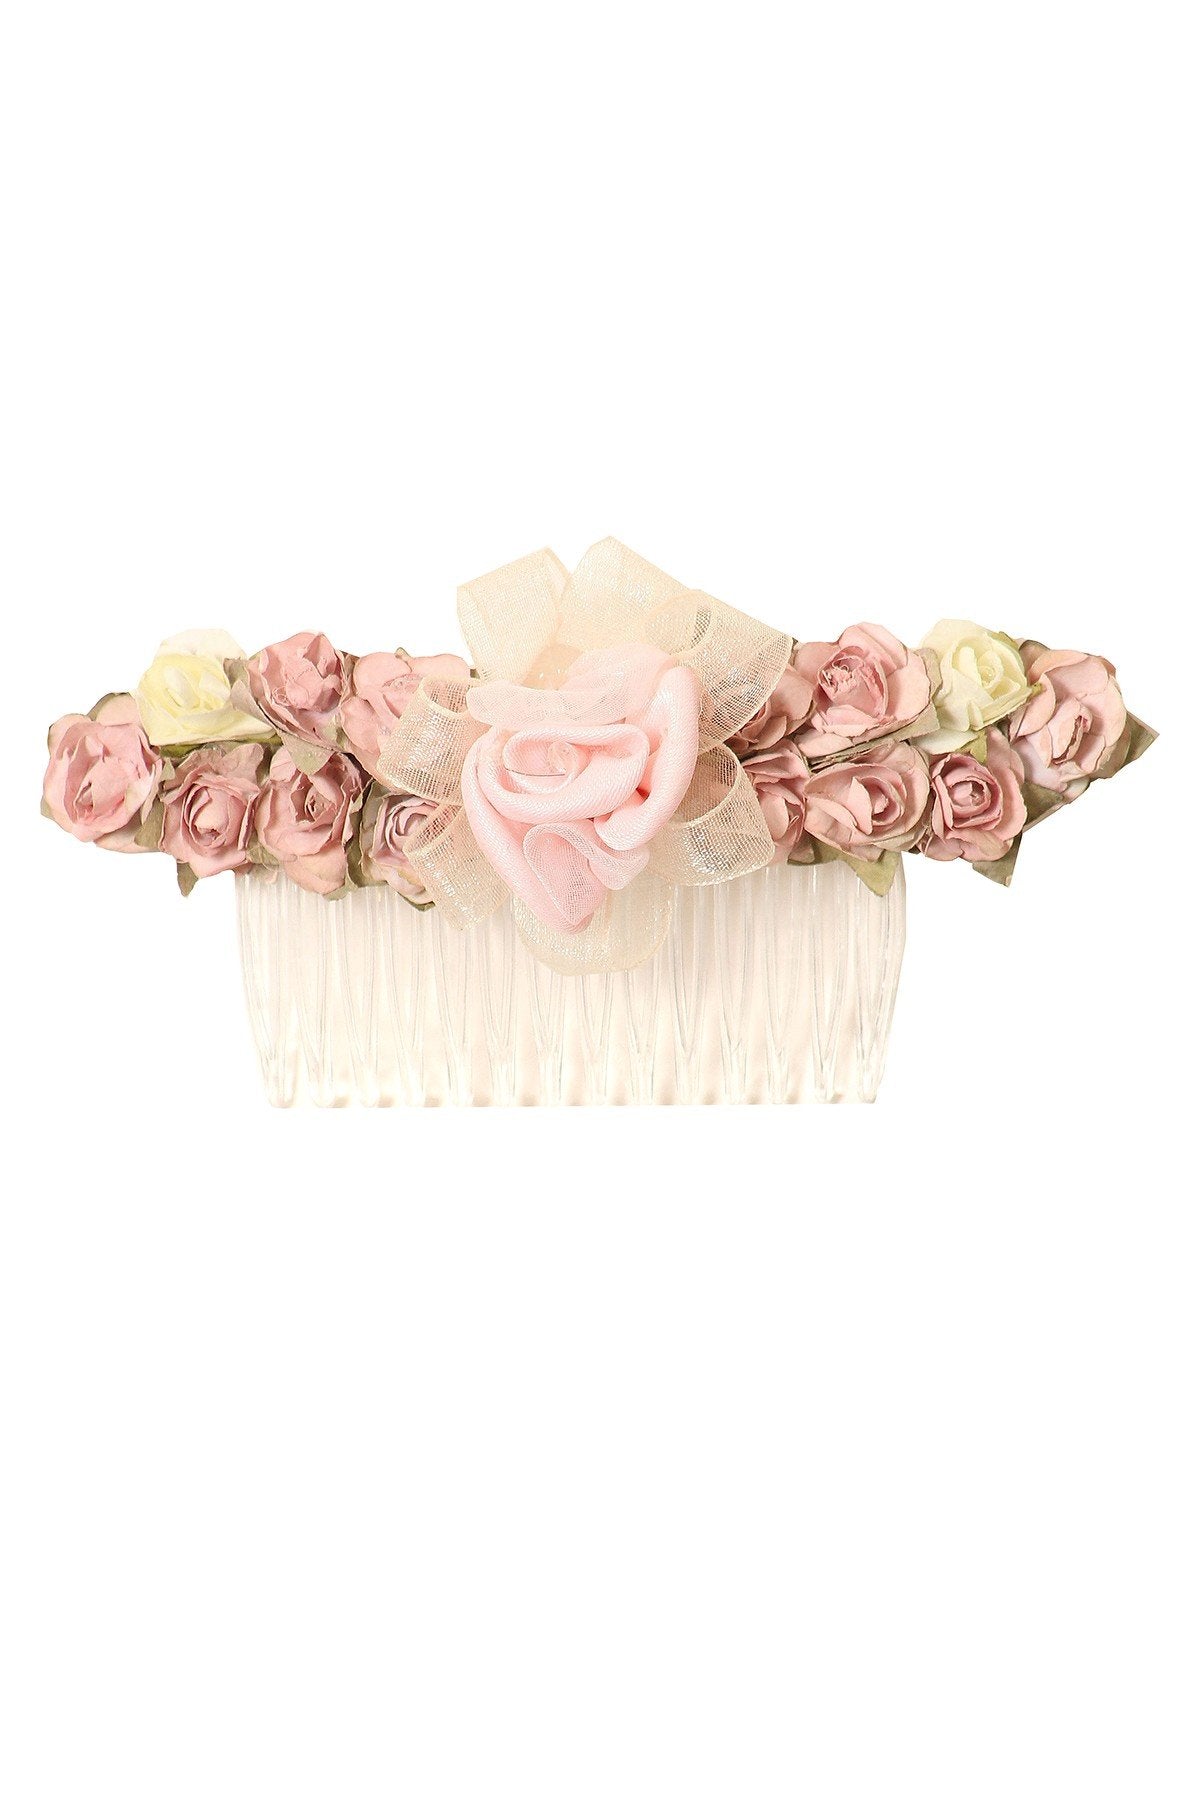 Accessories - Floral Comb For Hair